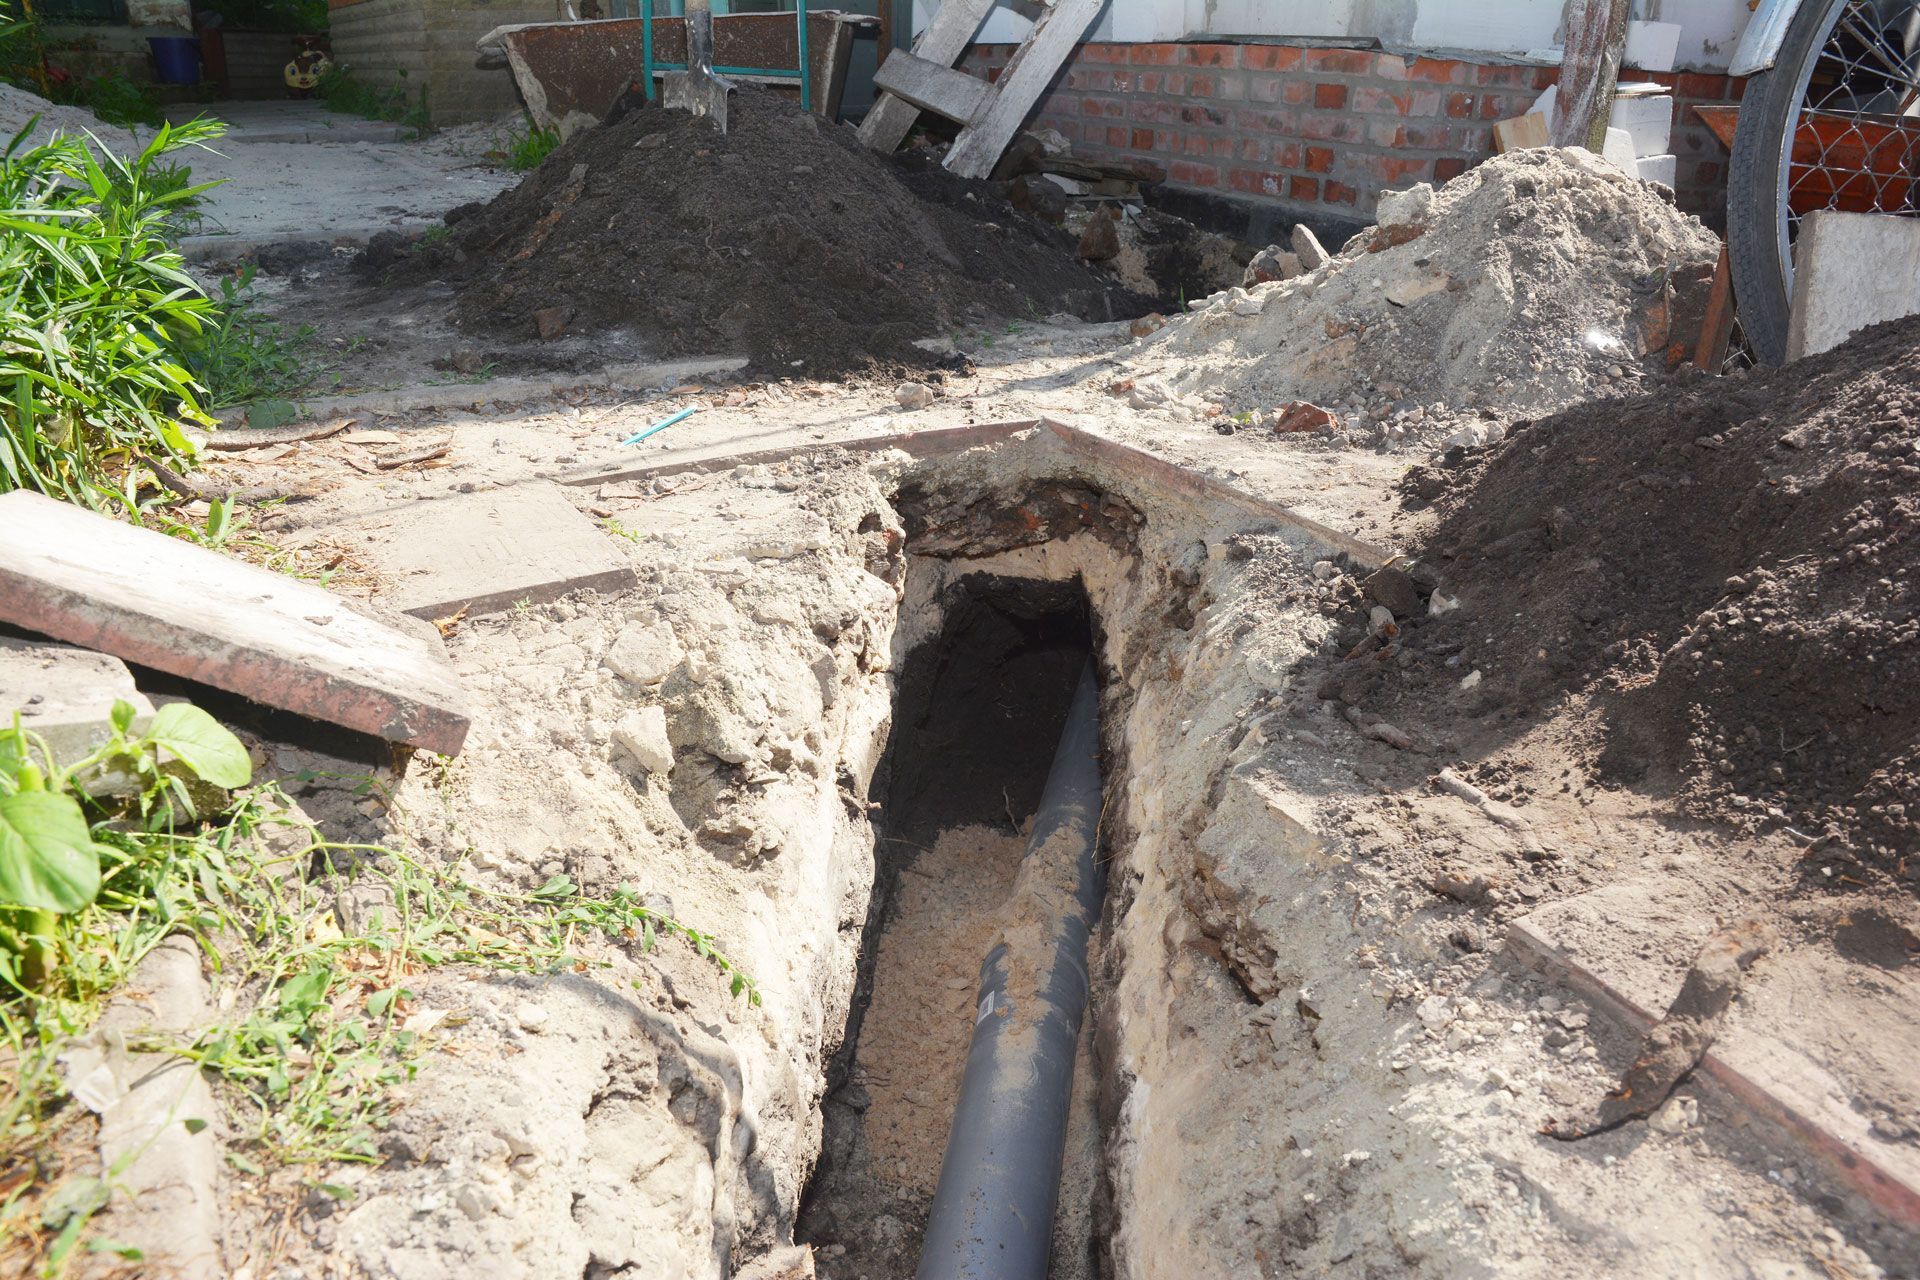 A pipe is being installed in a hole in the ground.